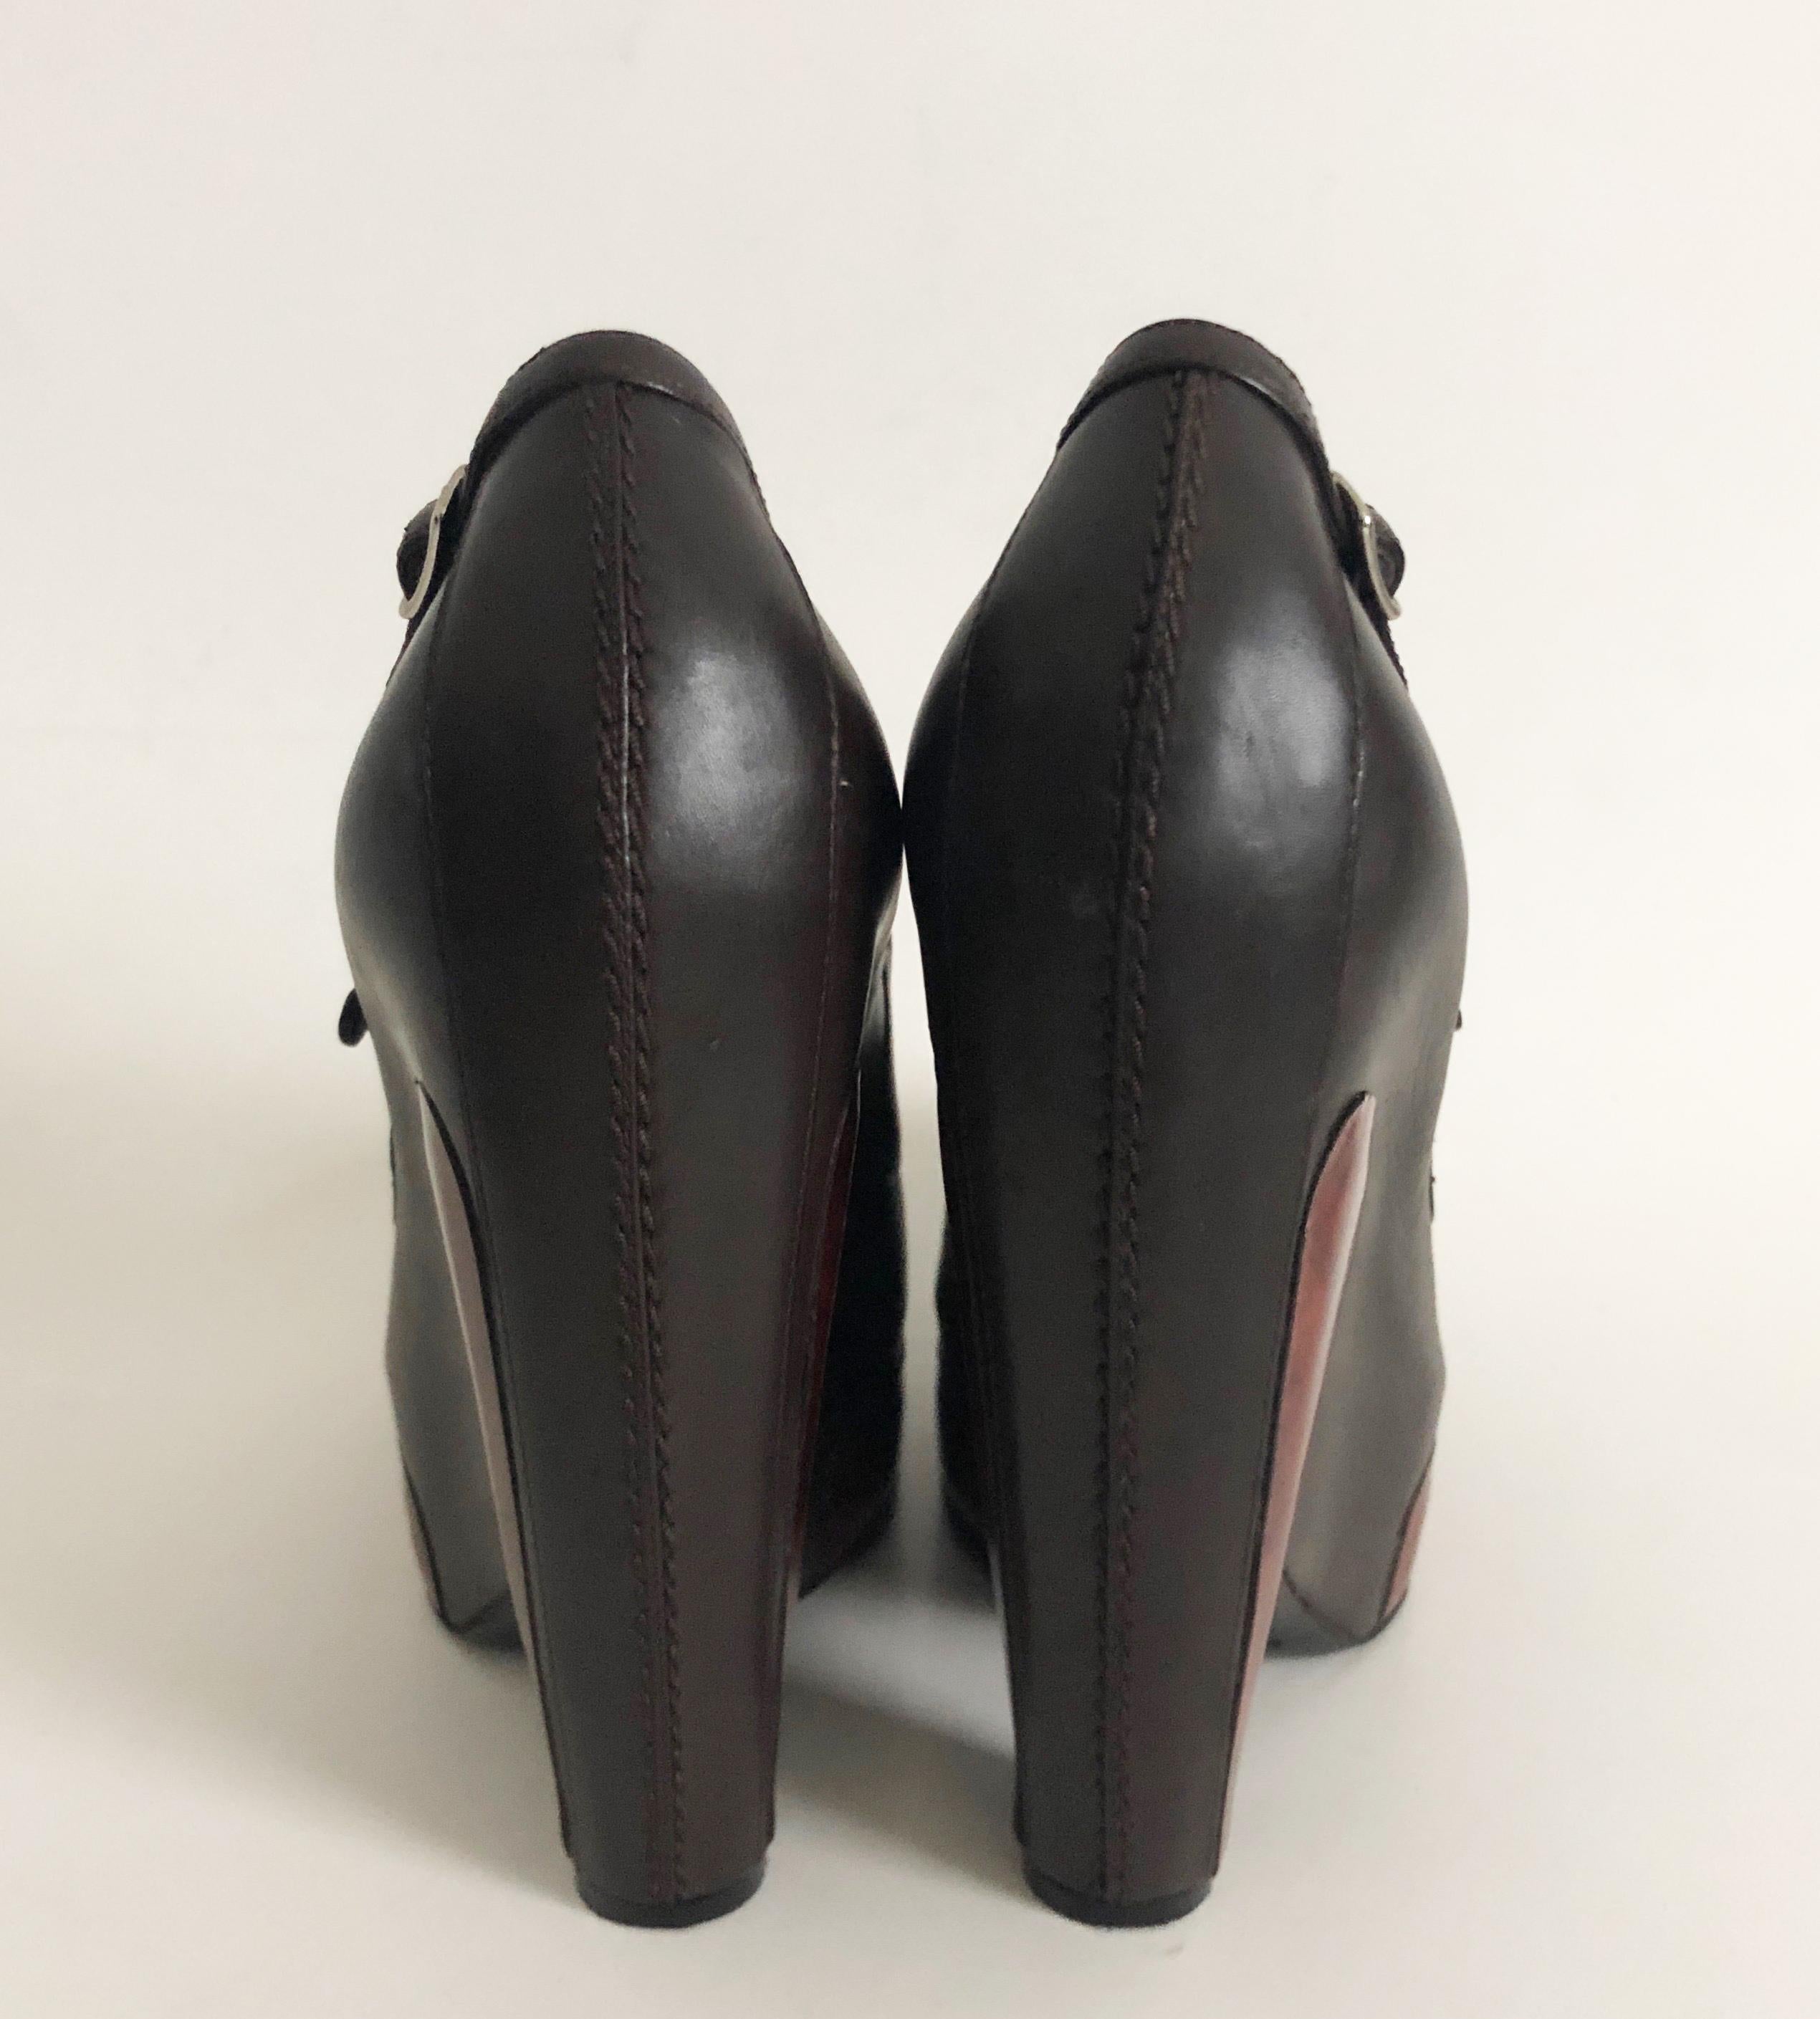 Balenciaga Nicolas Ghesquière Mary Jane Platforms Wood Leather Sz 8 F/W 2006  In Good Condition For Sale In Port Saint Lucie, FL